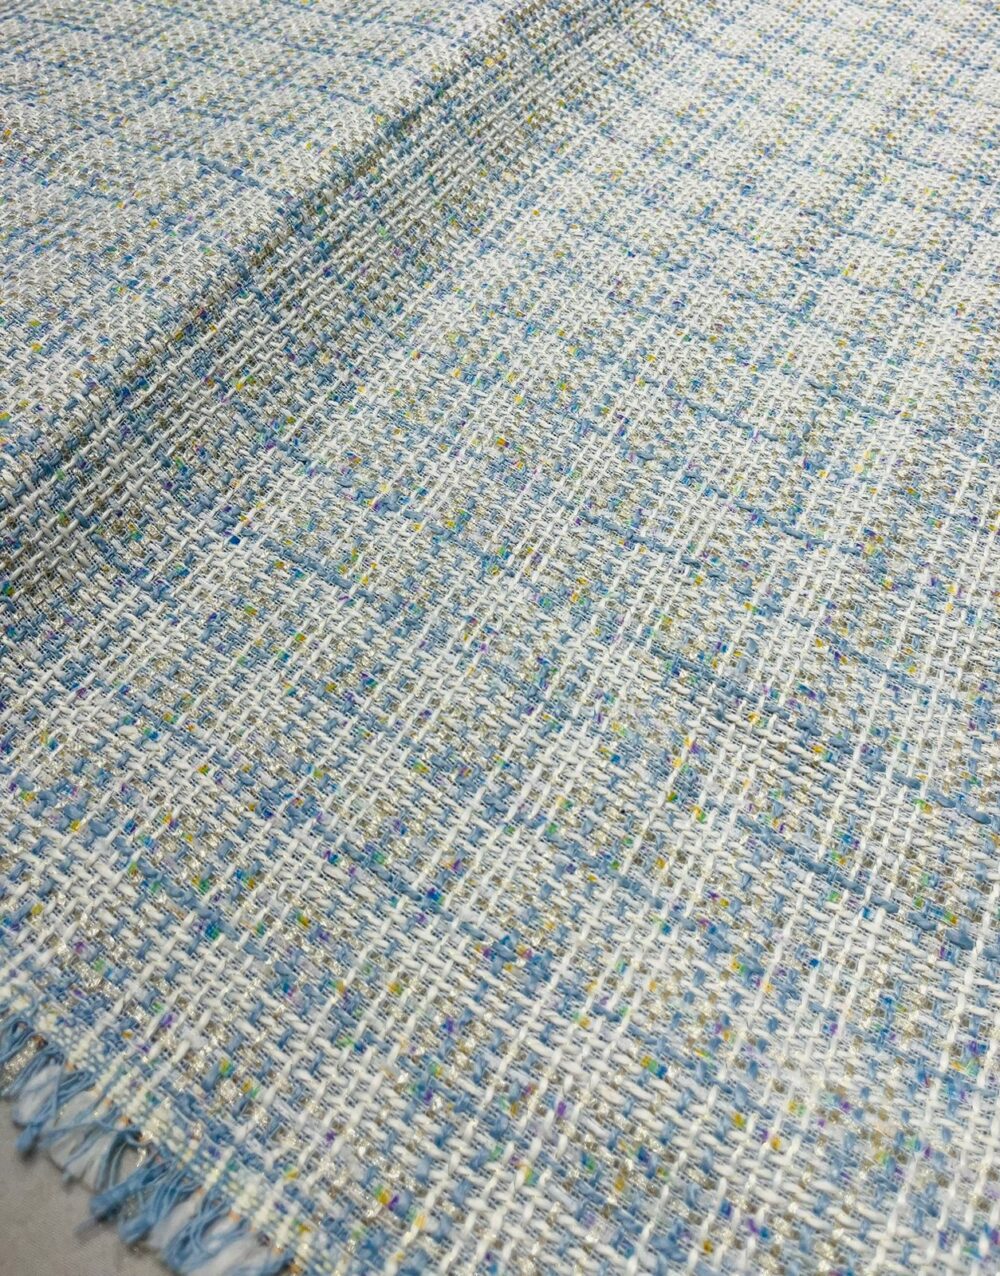 Wool Blend Boucle Tweed Check Fabric made for wool coats, pants, winter skirts & dresses, jackets, and coats & Fall clothing.